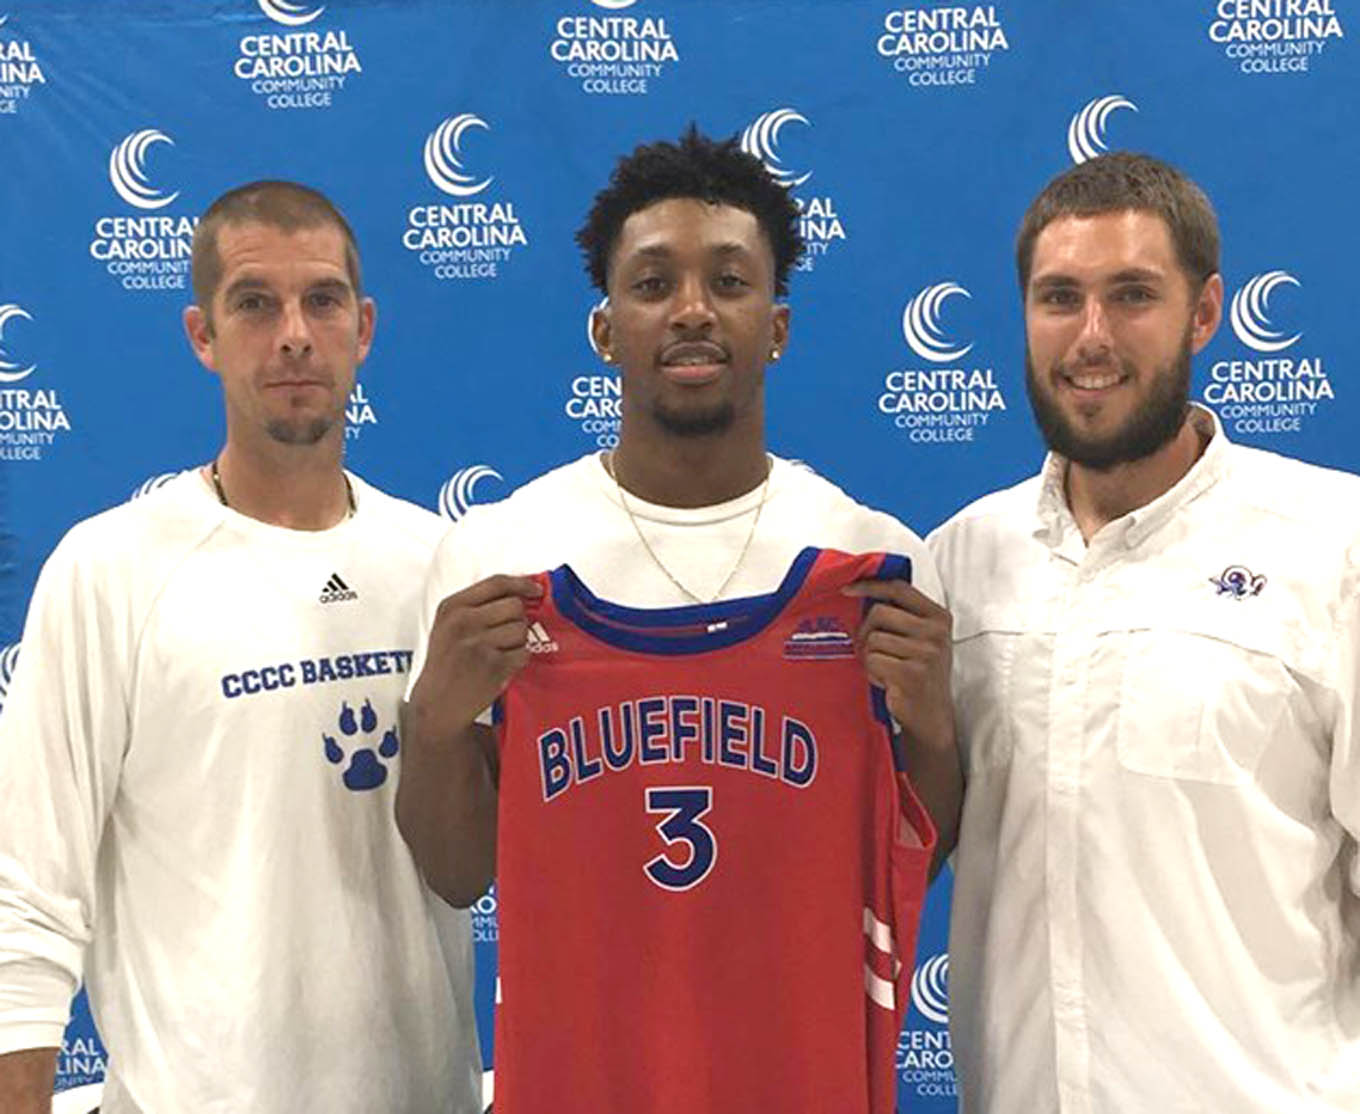 Read the full story, CCCC's Chris George signs with Bluefield College